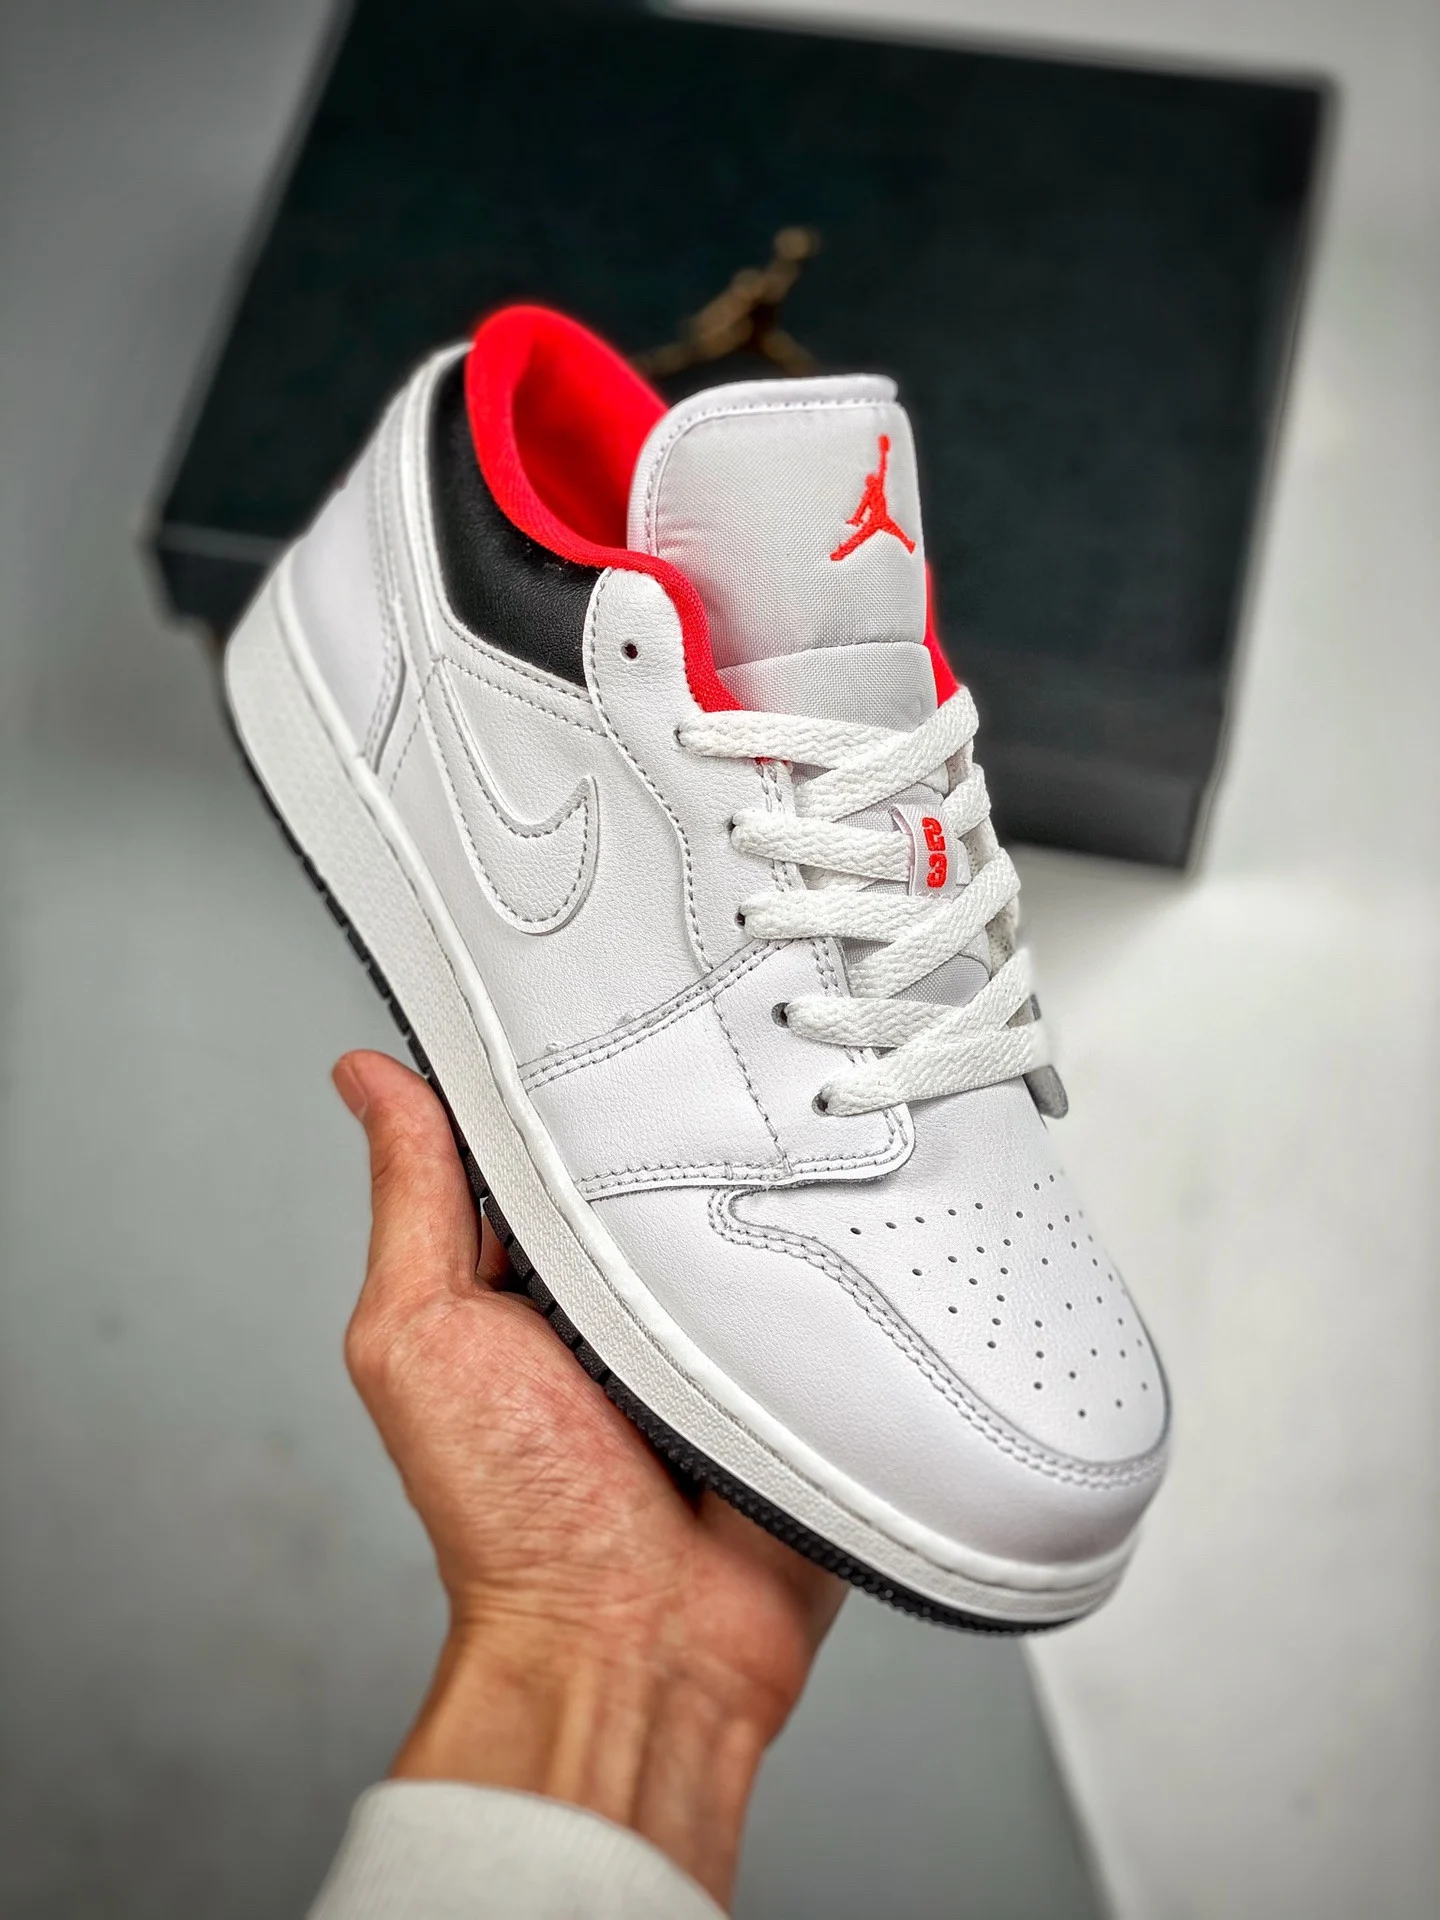 Air Jordan 1 Low GS Chicago Home White Black Red For Sale